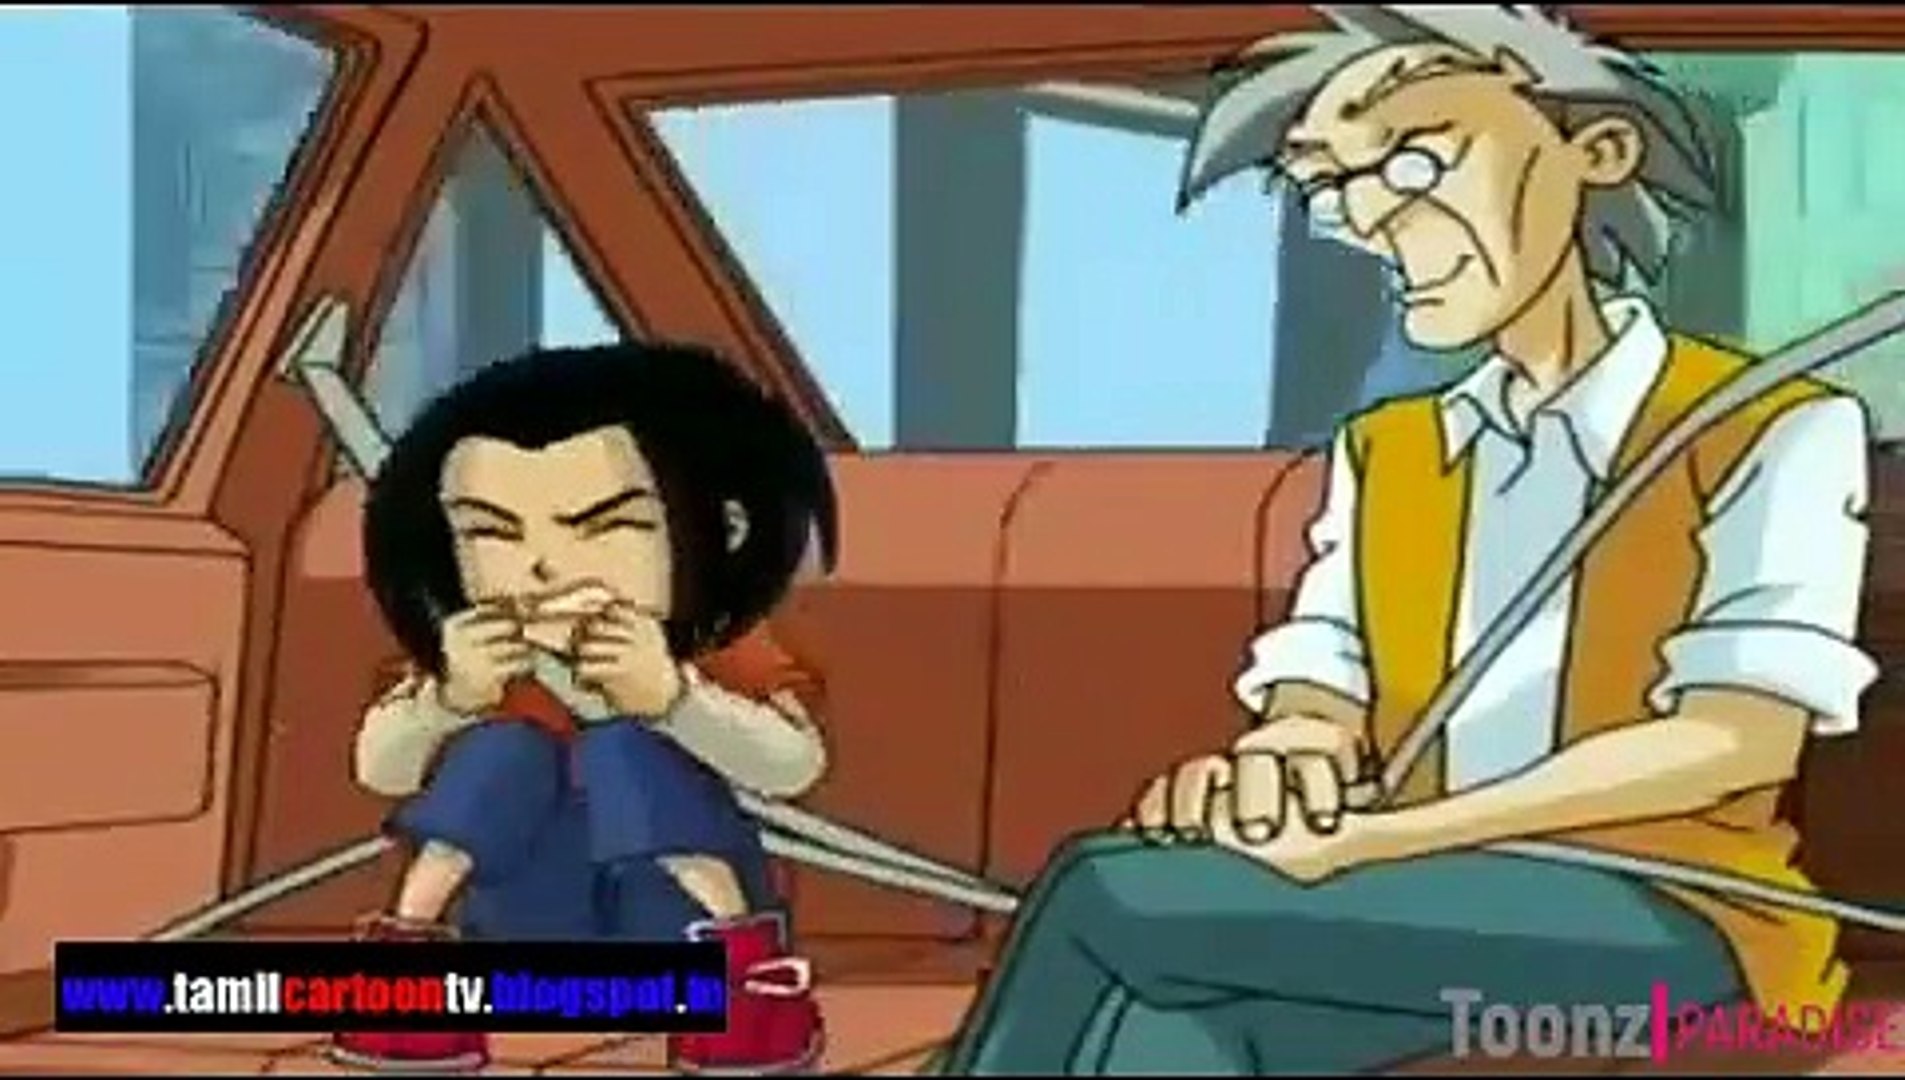 Adventures Of Jackie Chan In Tamil - Shell | Chutti TV Jackie Cartoon  Animated Series in Tamil - video Dailymotion